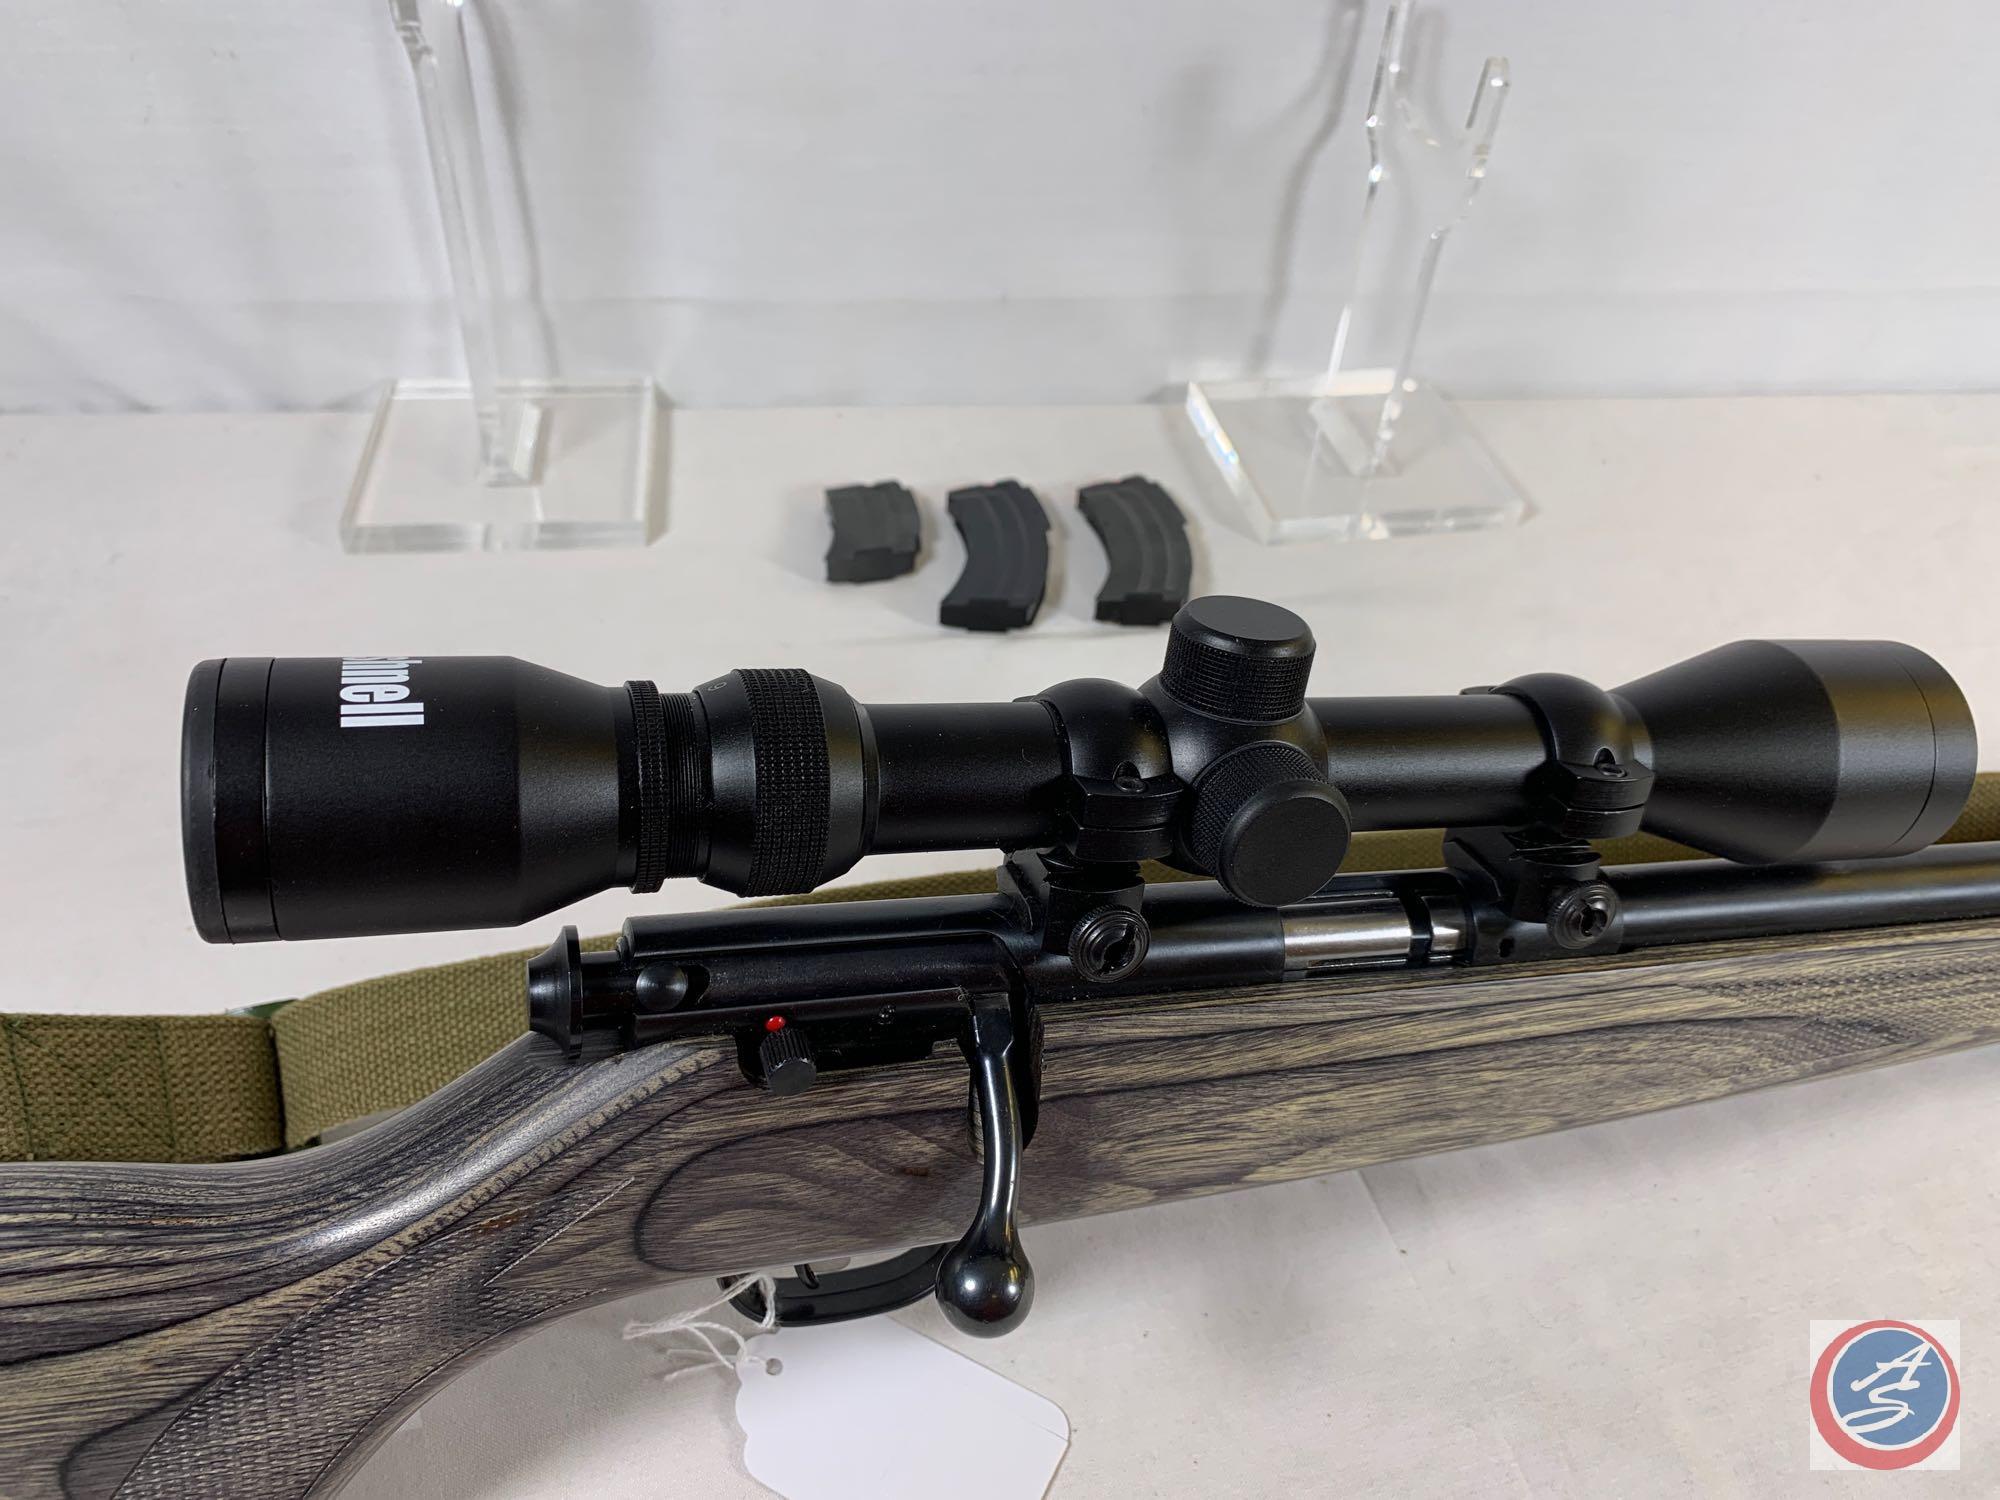 Savage Model Mark II 22 LR Rifle Bolt Action Rifle with Bushnell 4-9 Scope, sling and 3 magazines